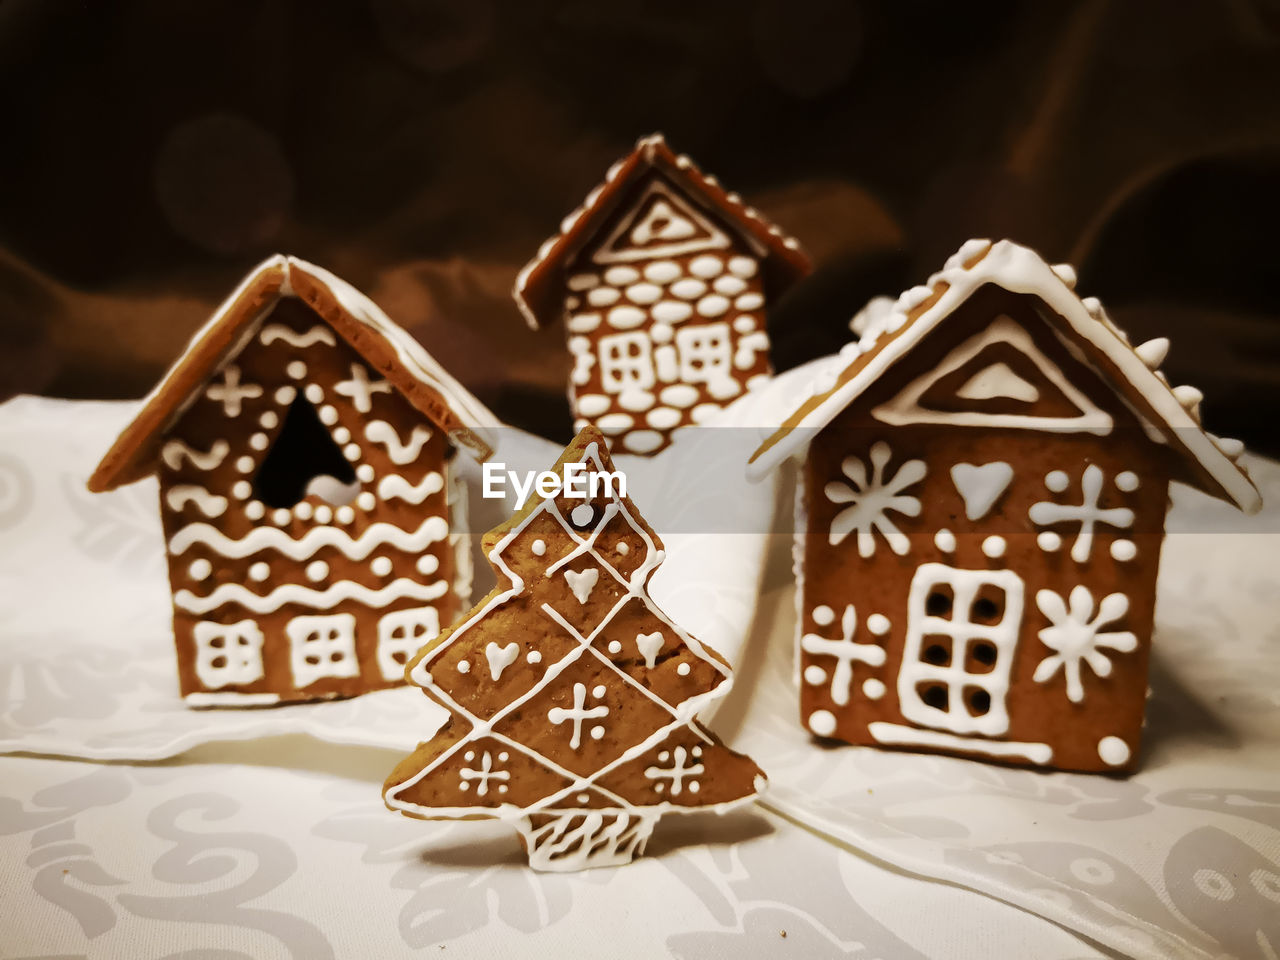 Gingerbread houses and christmas tree decorated with white glaze in new year and christmas patterns